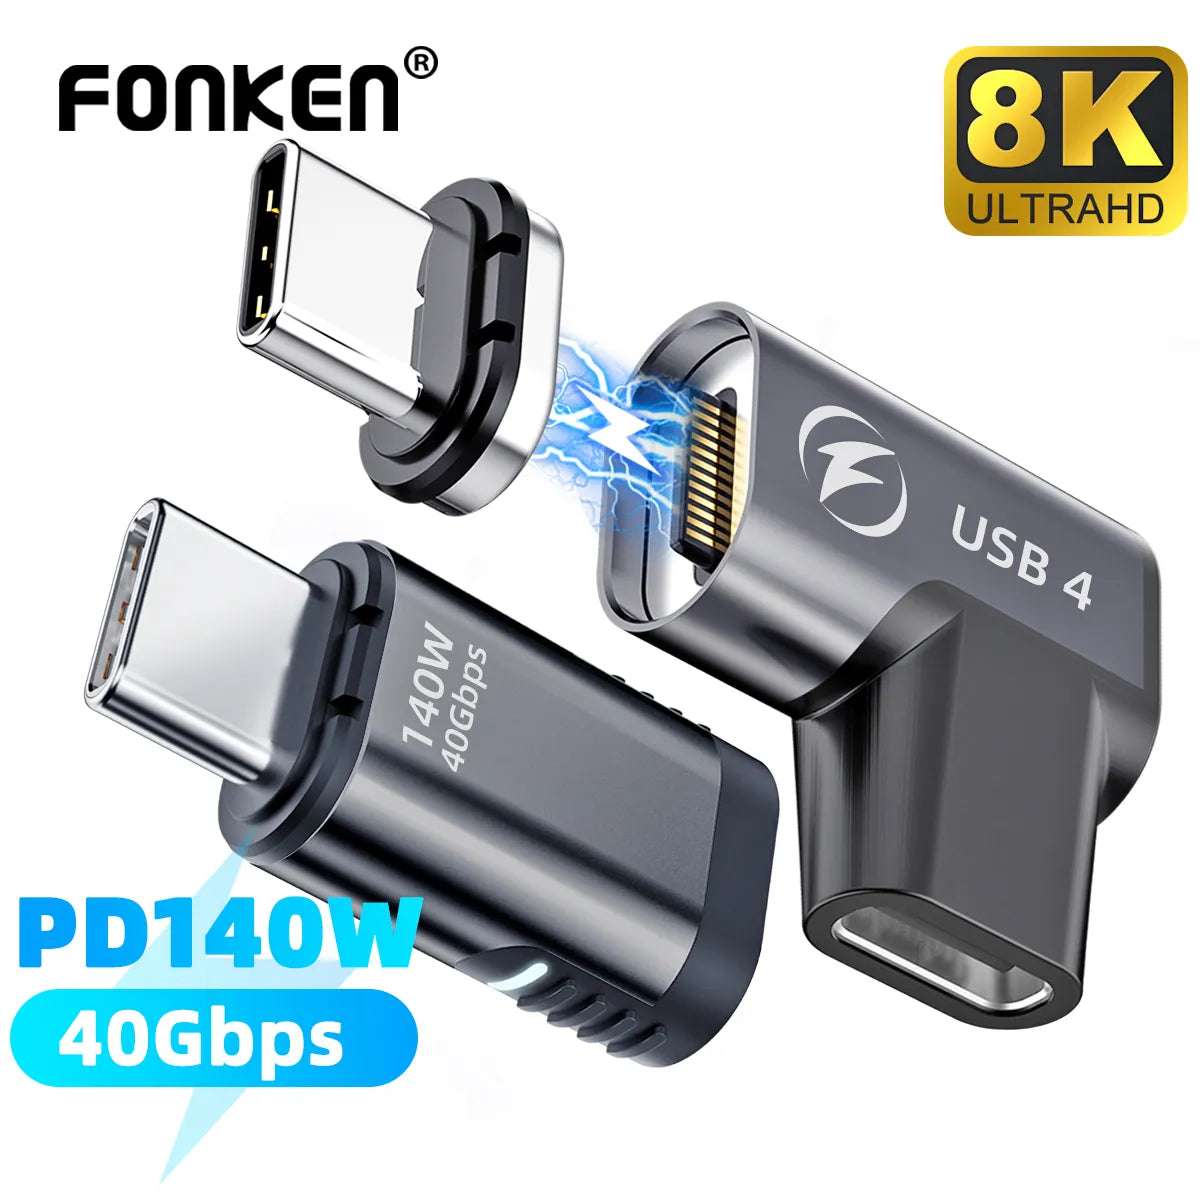 FONKEN Magnetic USB Adapter: Ultimate Fast Charge & Data Solution  ourlum.com   